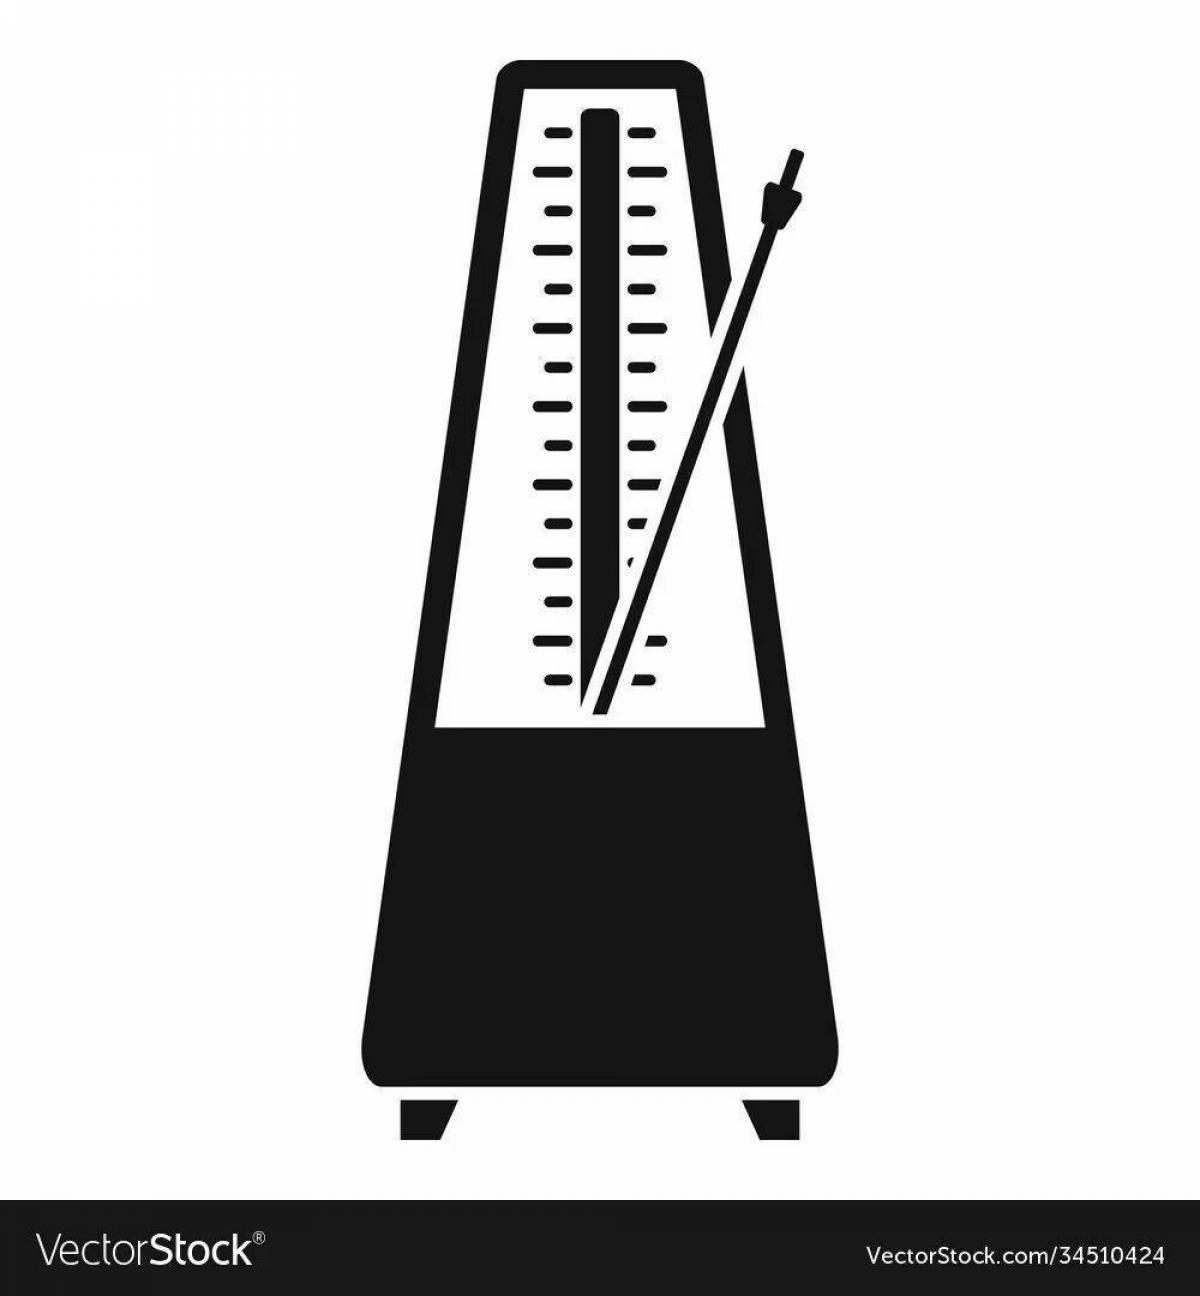 Colouring cheerful metronome